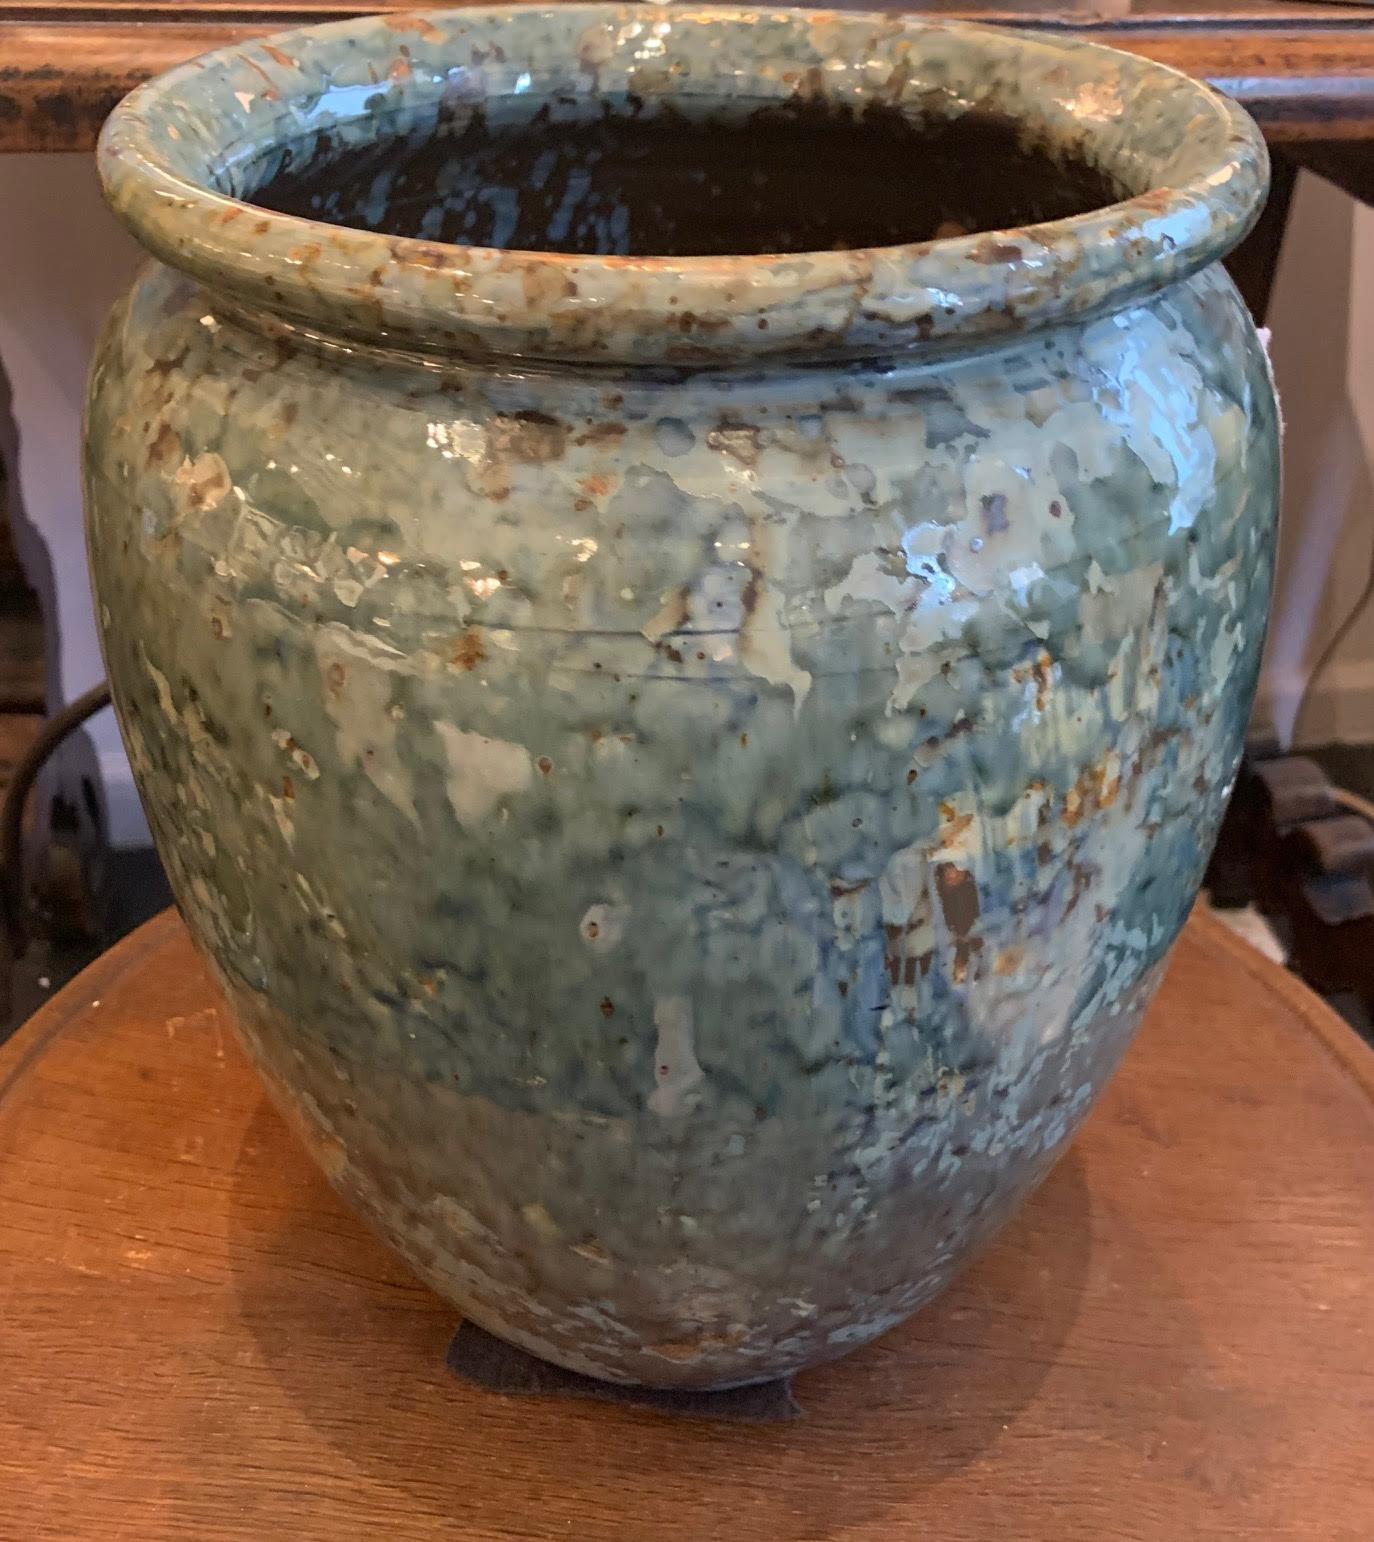 Contemporary Chinese cache pot shaped vase.
Glazed splattered blue colors.